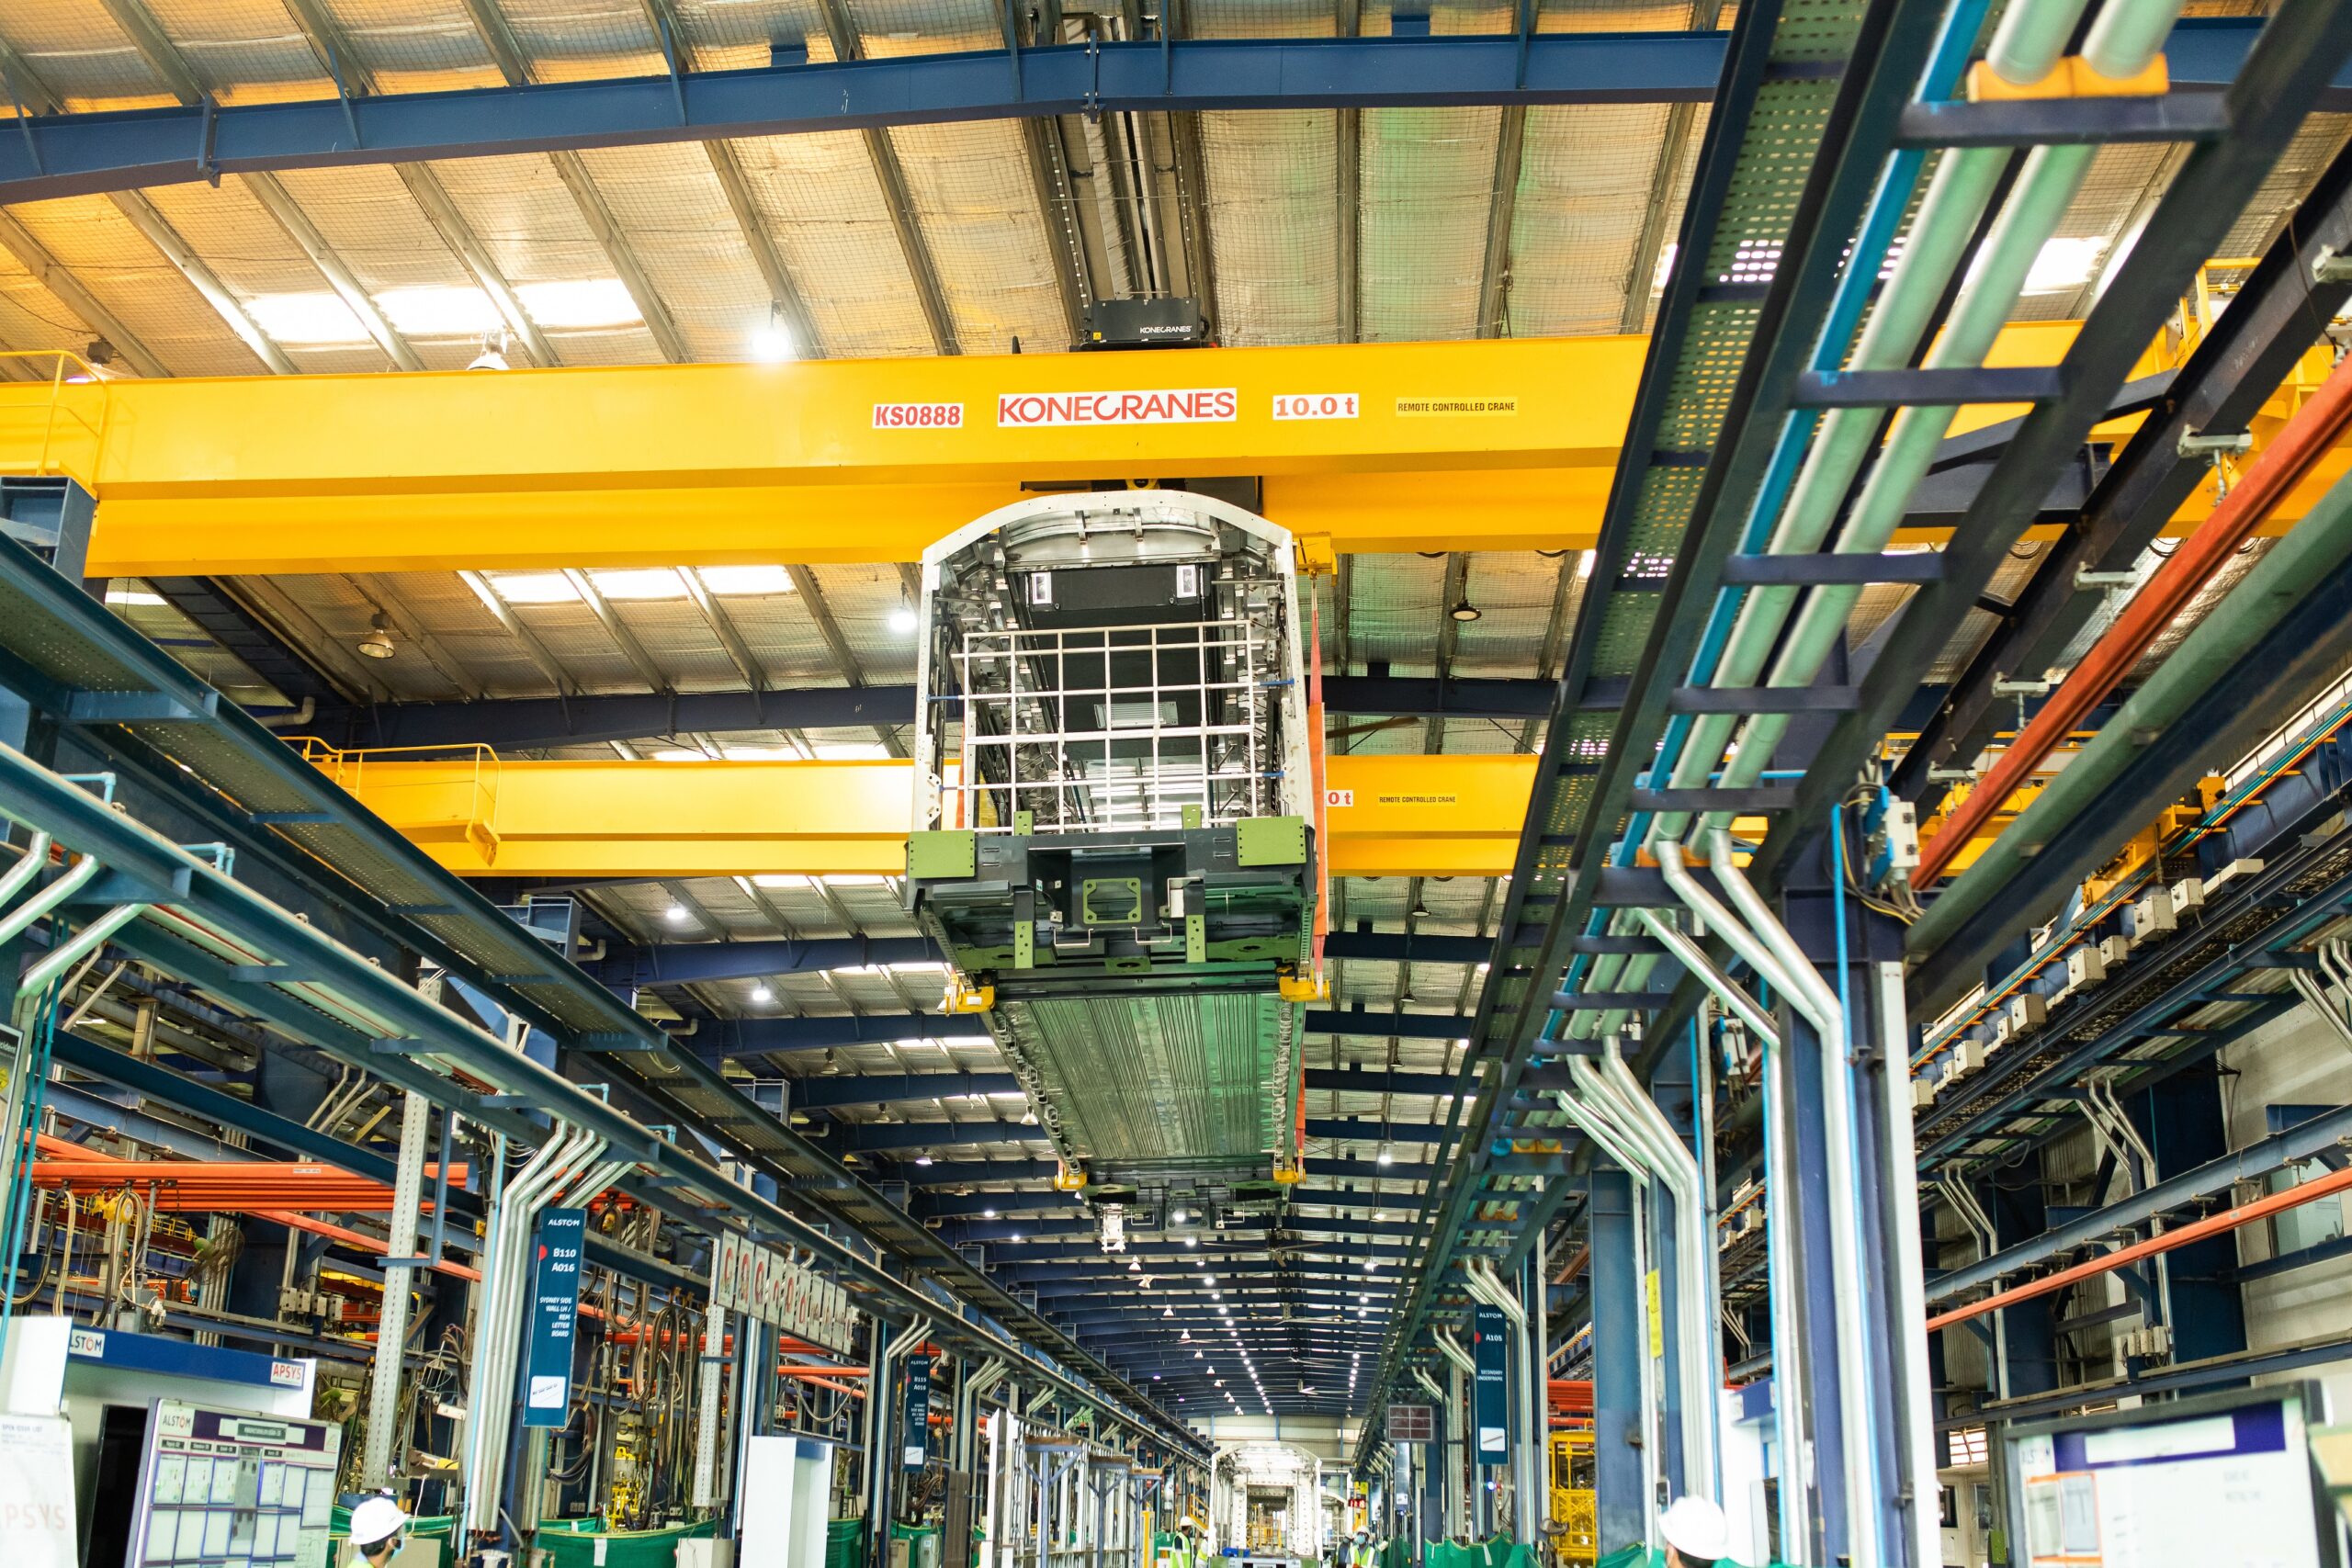 Alstom Metropolis car body being built at SriCity factory in India